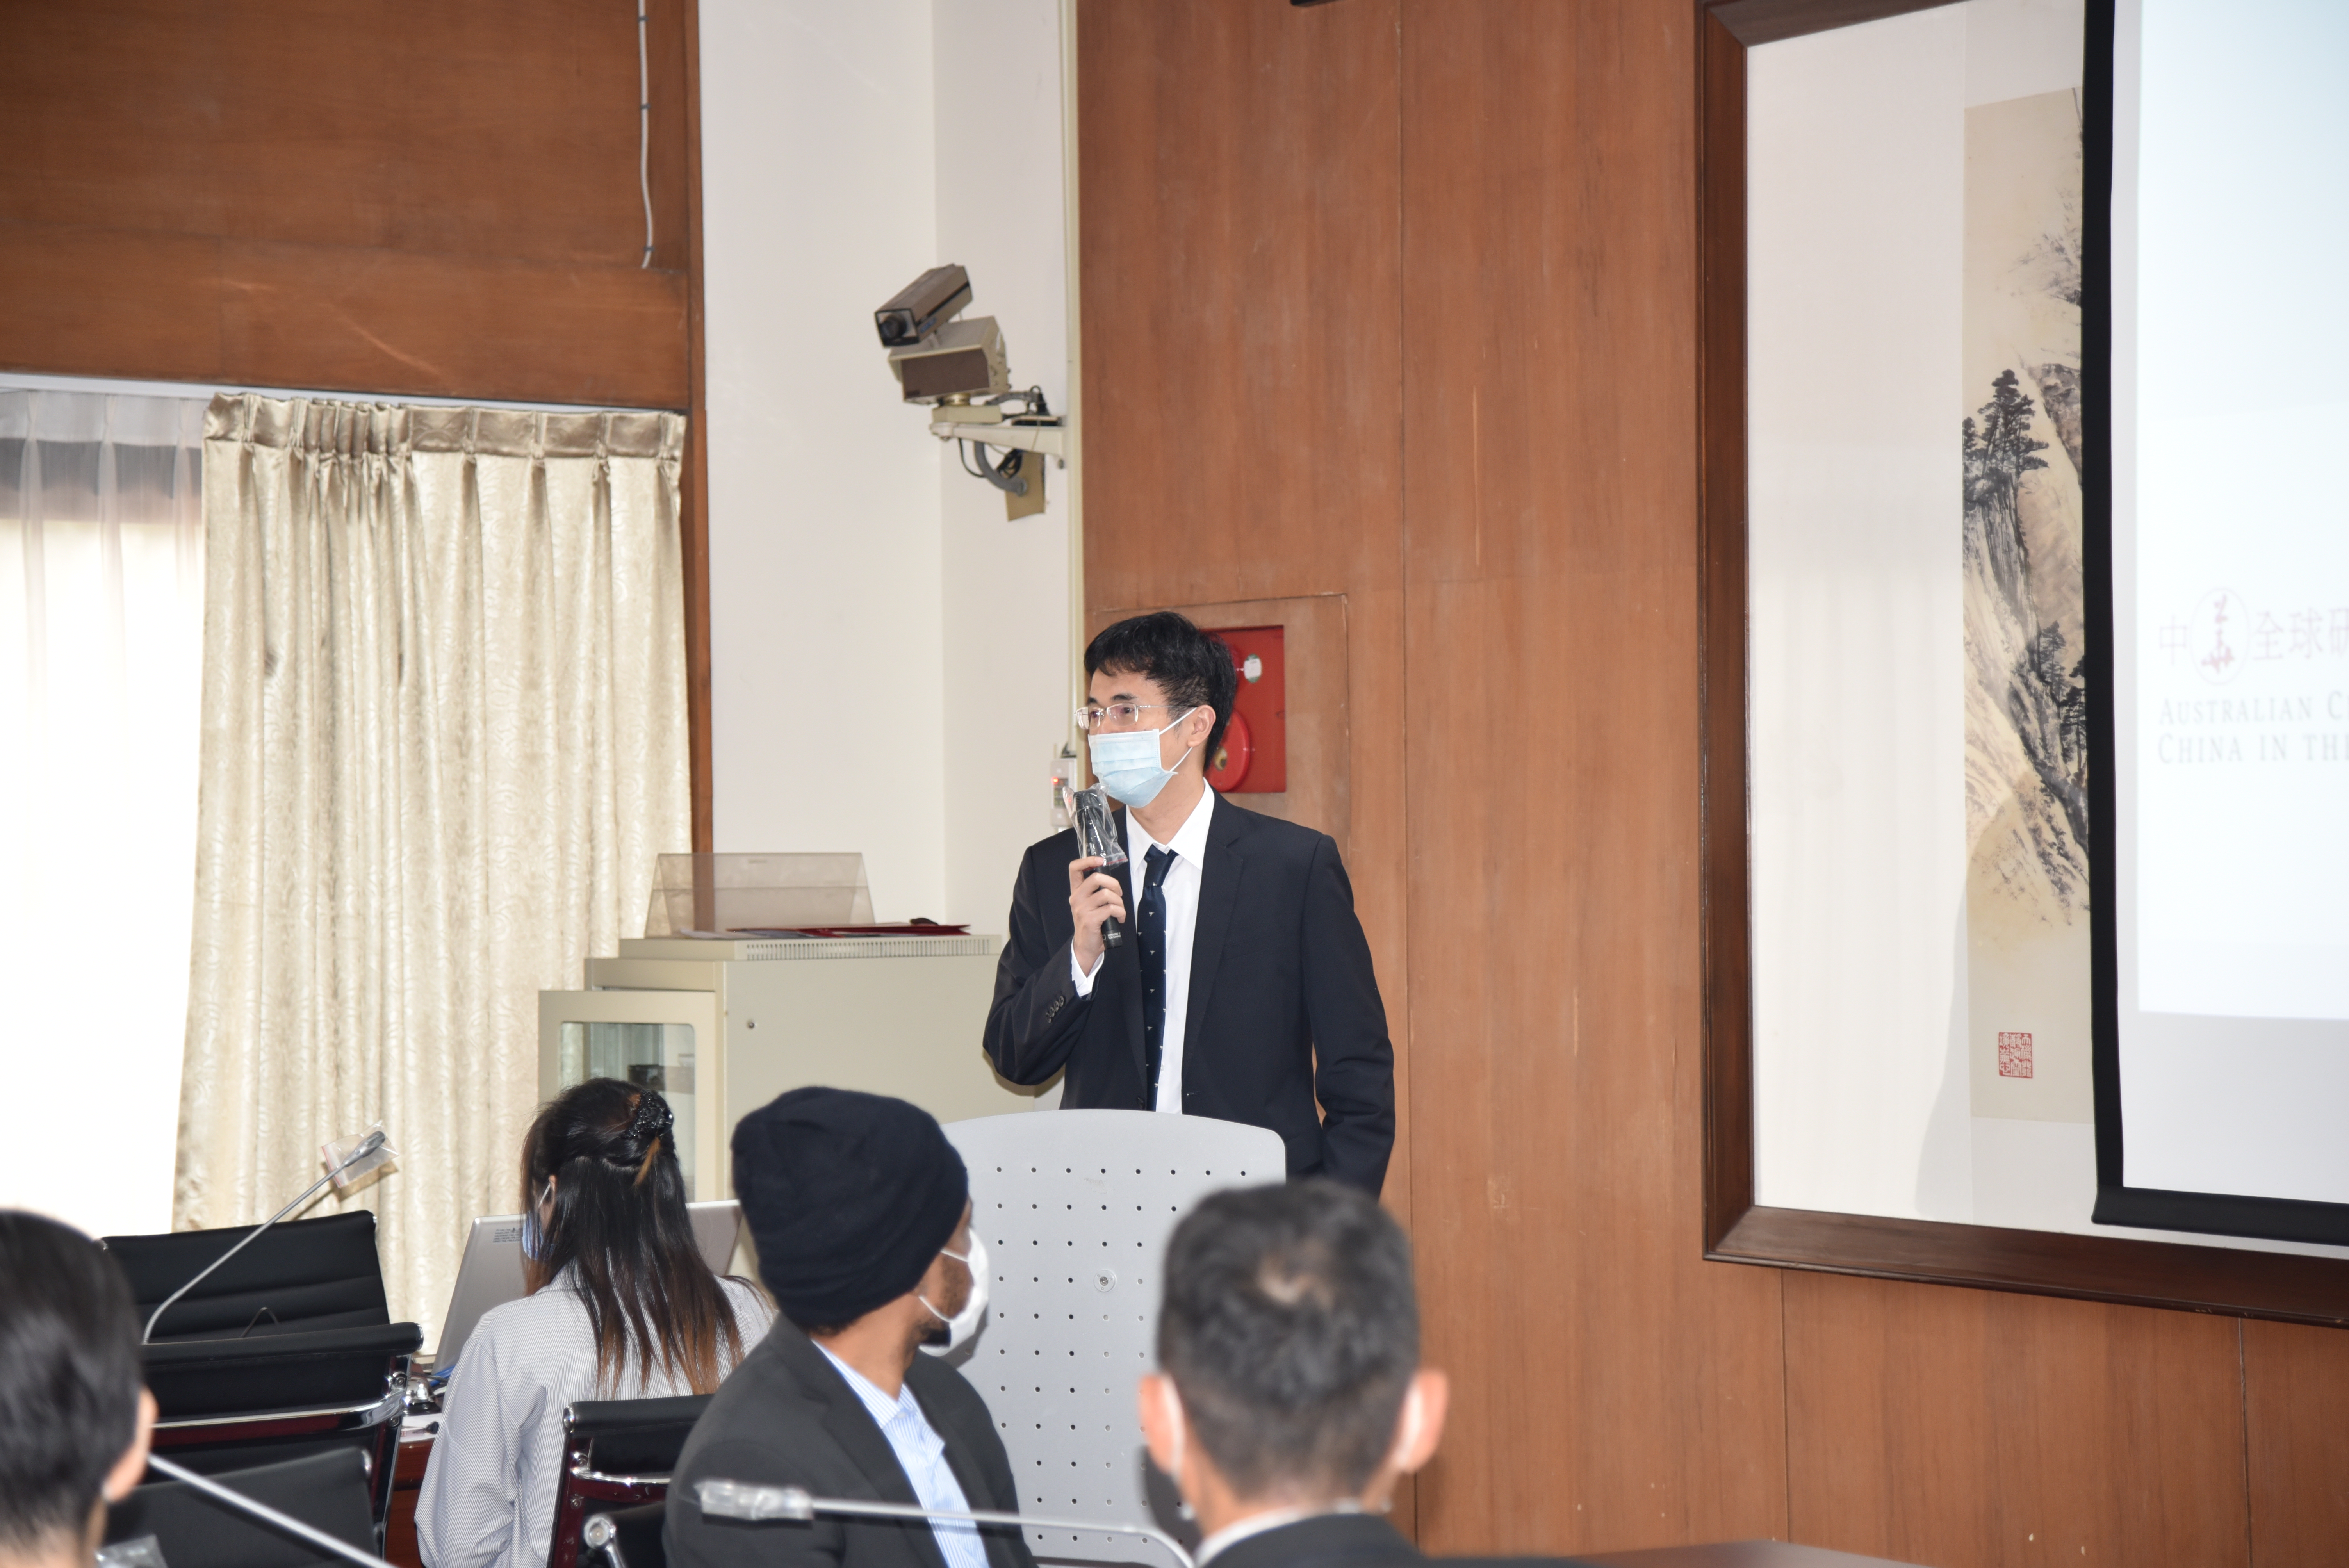 2021Presentations of MOFA Taiwan Fellowship Scholars: Stability and Prosperity in the Indo-Pacific Region  – Taiwan